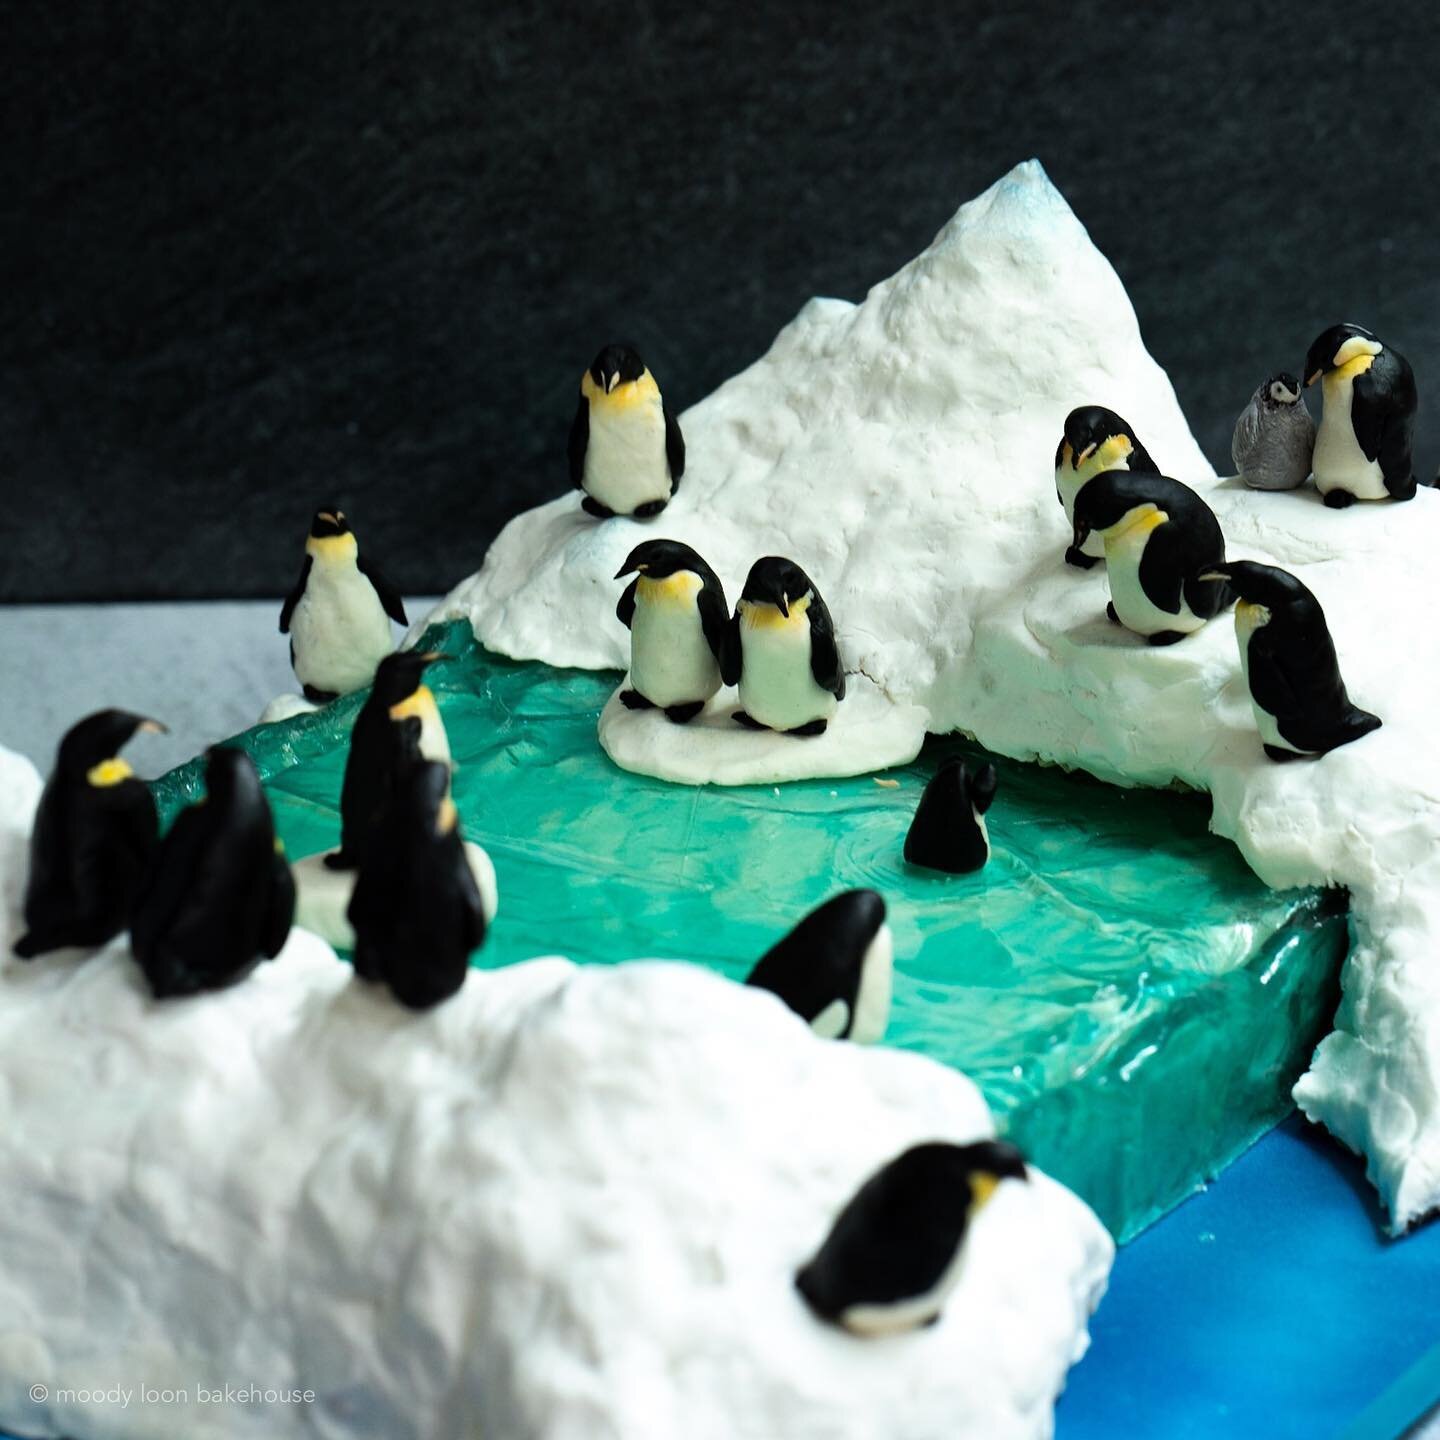 Kids and time are a funny thing. Seems like not too long ago I was struggling to soothe my colicky newborn son round the clock, but I blinked, and he turned 10 this summer!
&mdash;&mdash;
So I made my boy this here penguin cake. I played with some ne